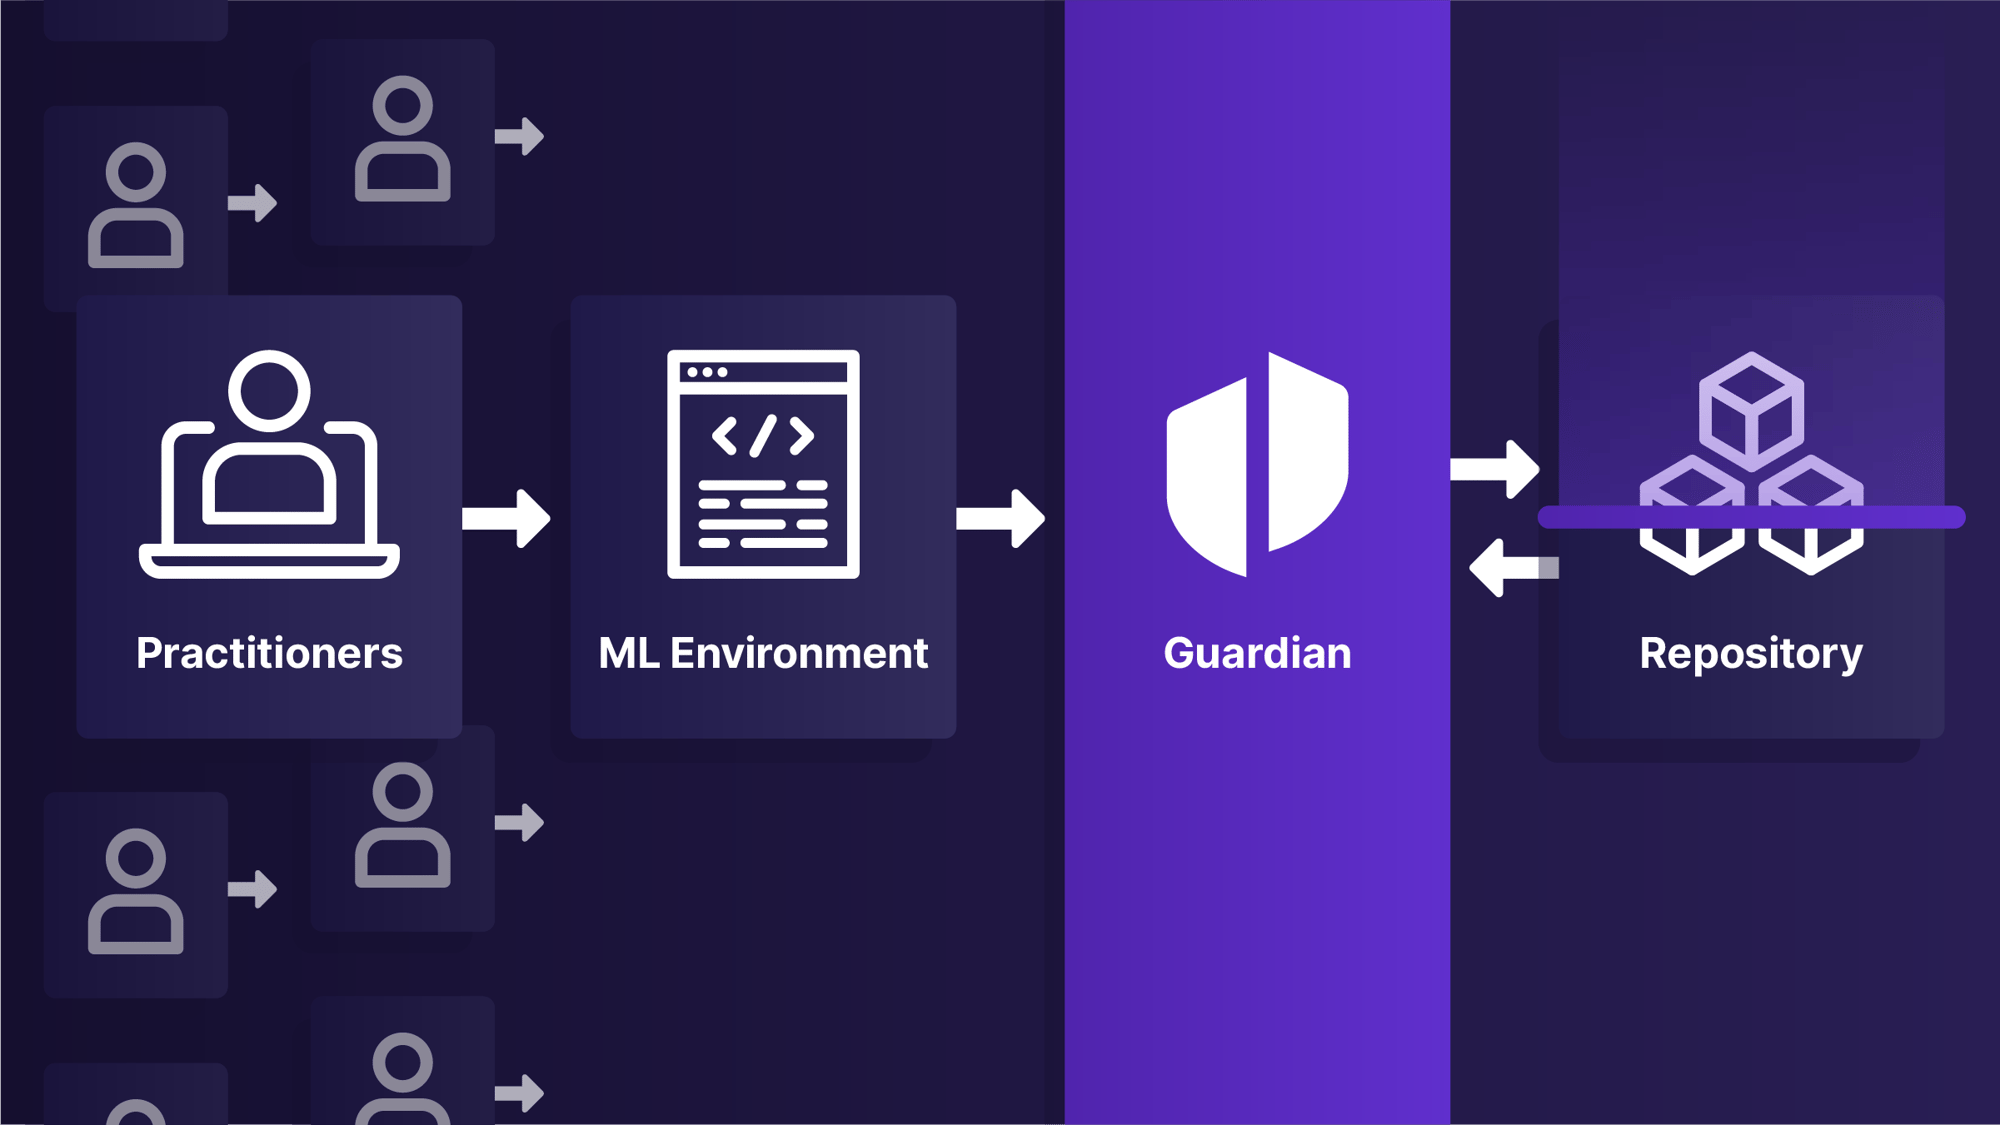 Guardian-Key features-x